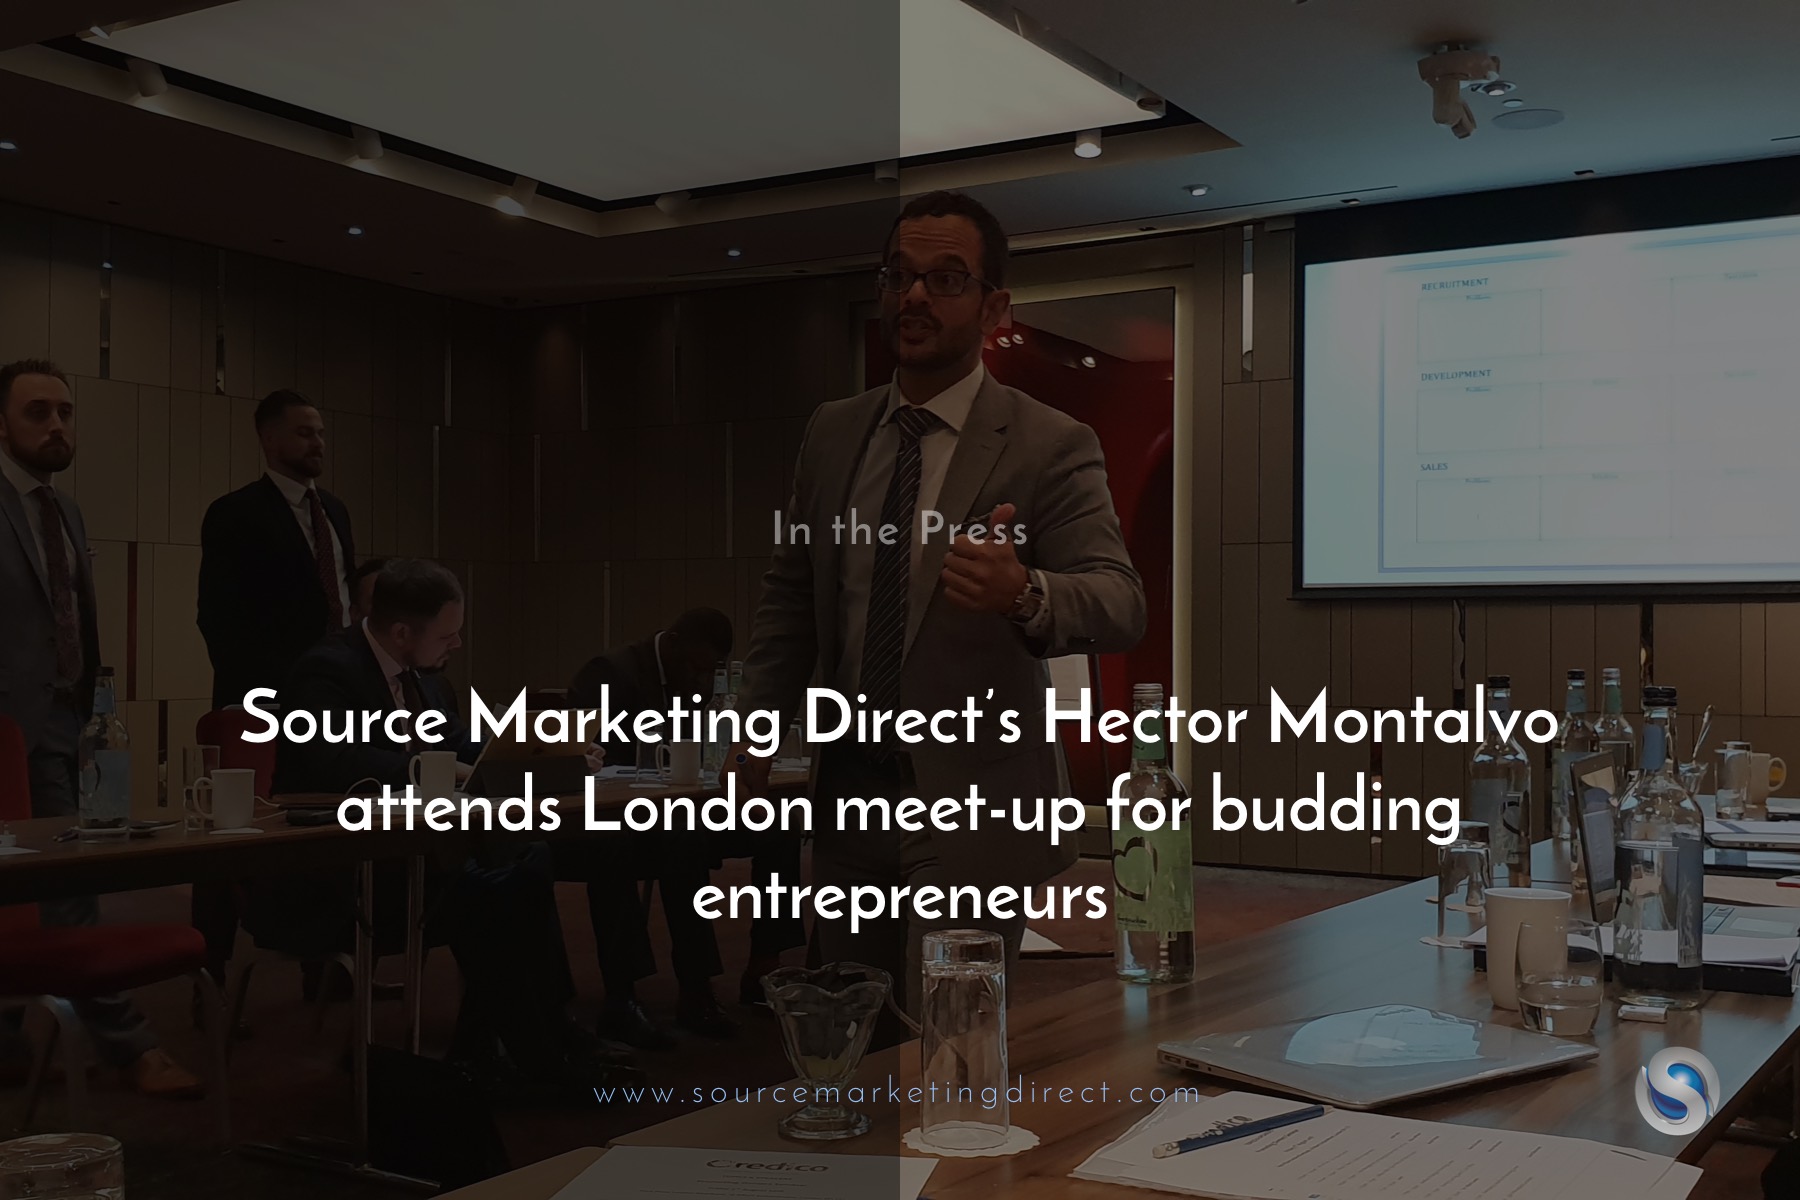 Source Marketing Direct’s Hector Montalvo attends London meet-up for budding entrepreneurs